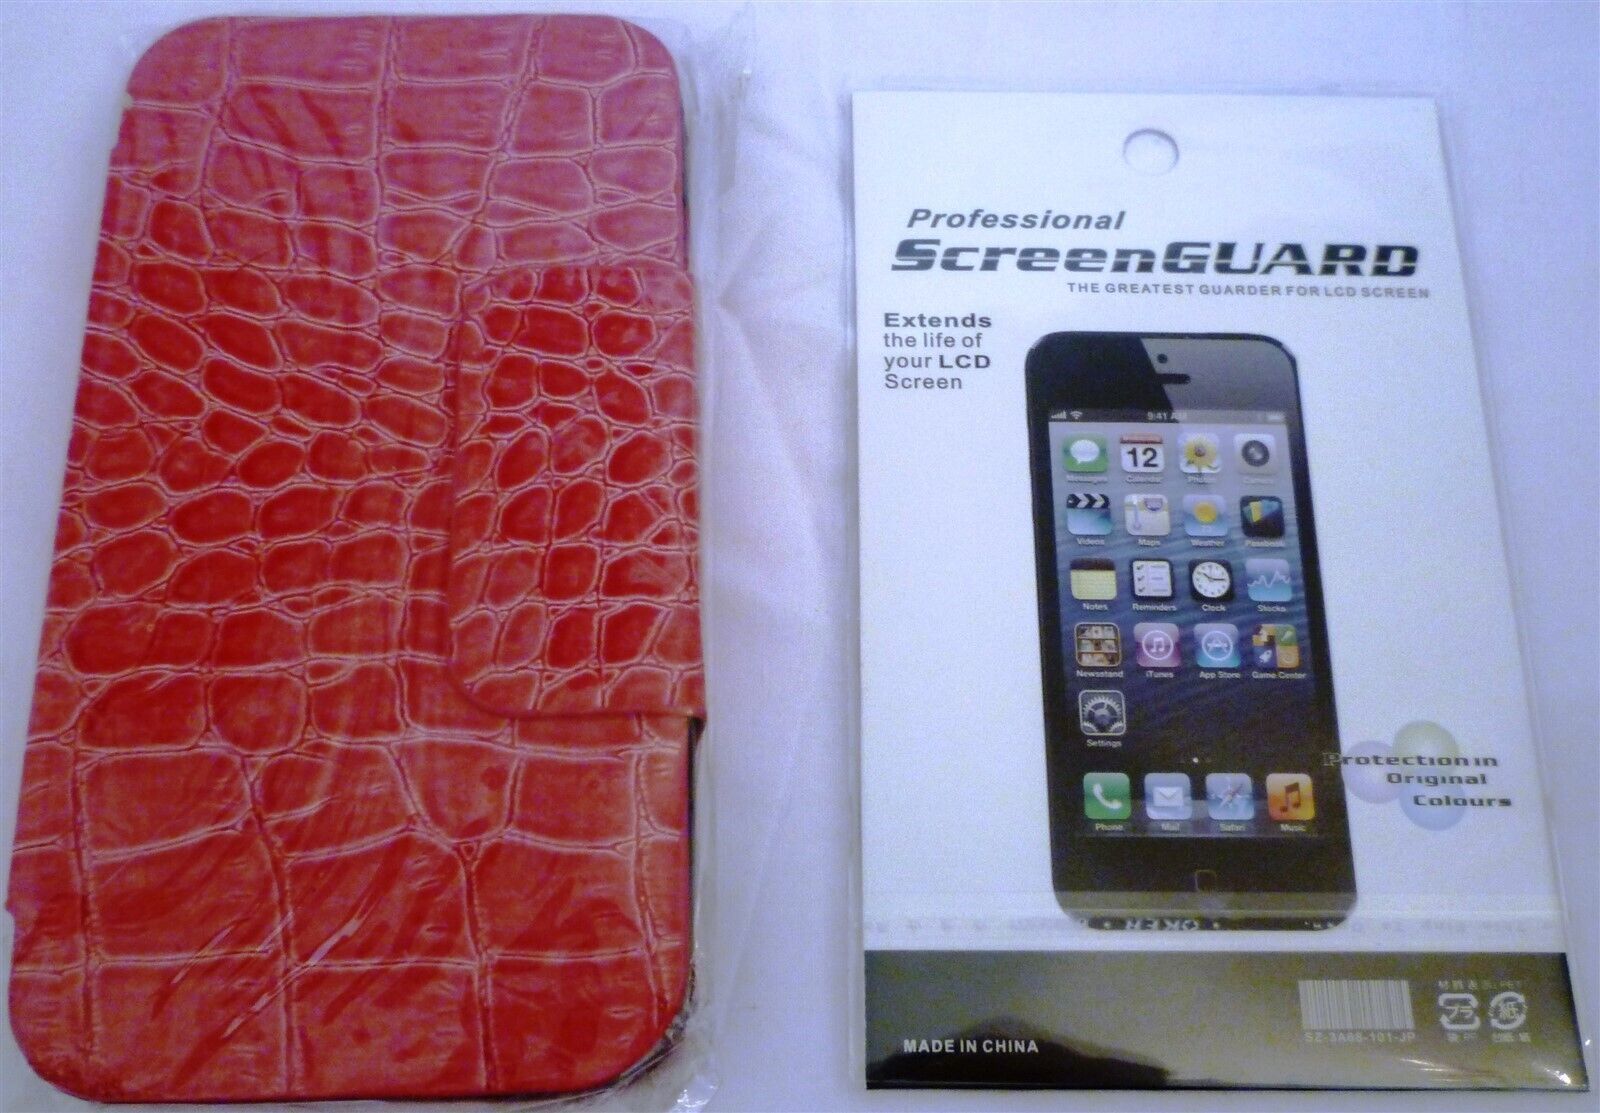 SAMSUNG GALAXY S-III FAUX CROCODILE LEATHER CASE + SCREEN GUARD NEW PACKAGE - $11.76